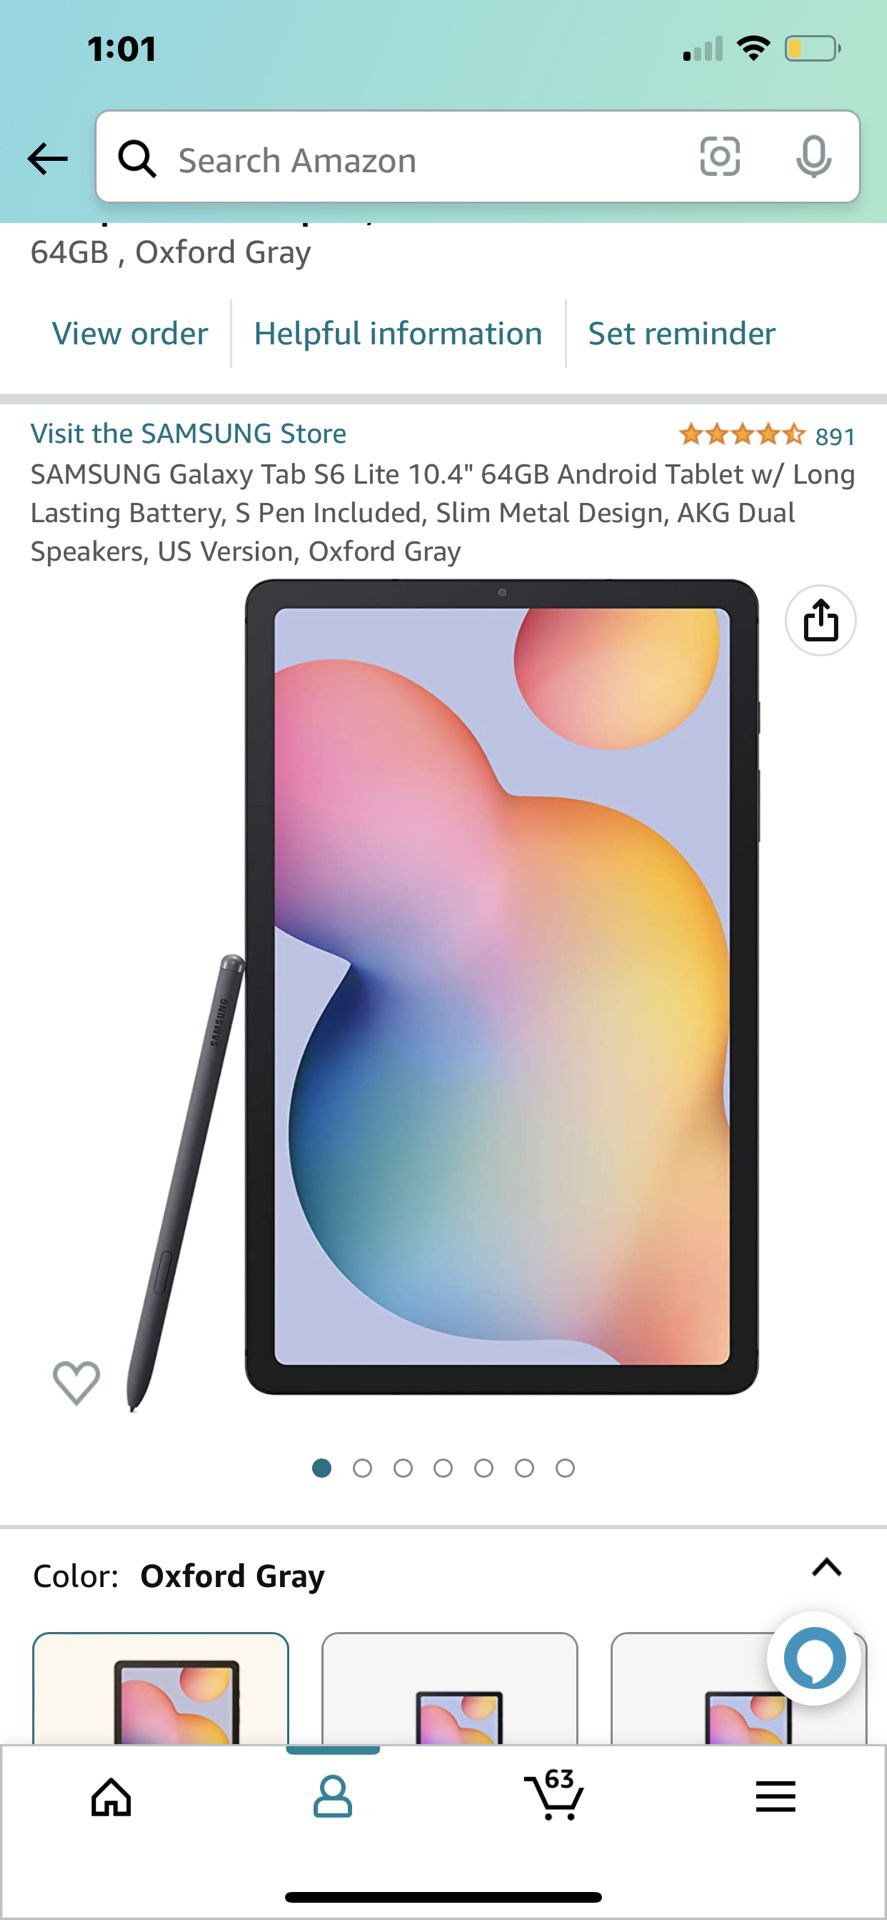 SAMSUNG Galaxy Tab S6 Lite 10.4" 64GB Android Tablet w/ Long Lasting Battery, S Pen Included, Slim Metal Design, AKG Dual Speakers, US Version, Oxford